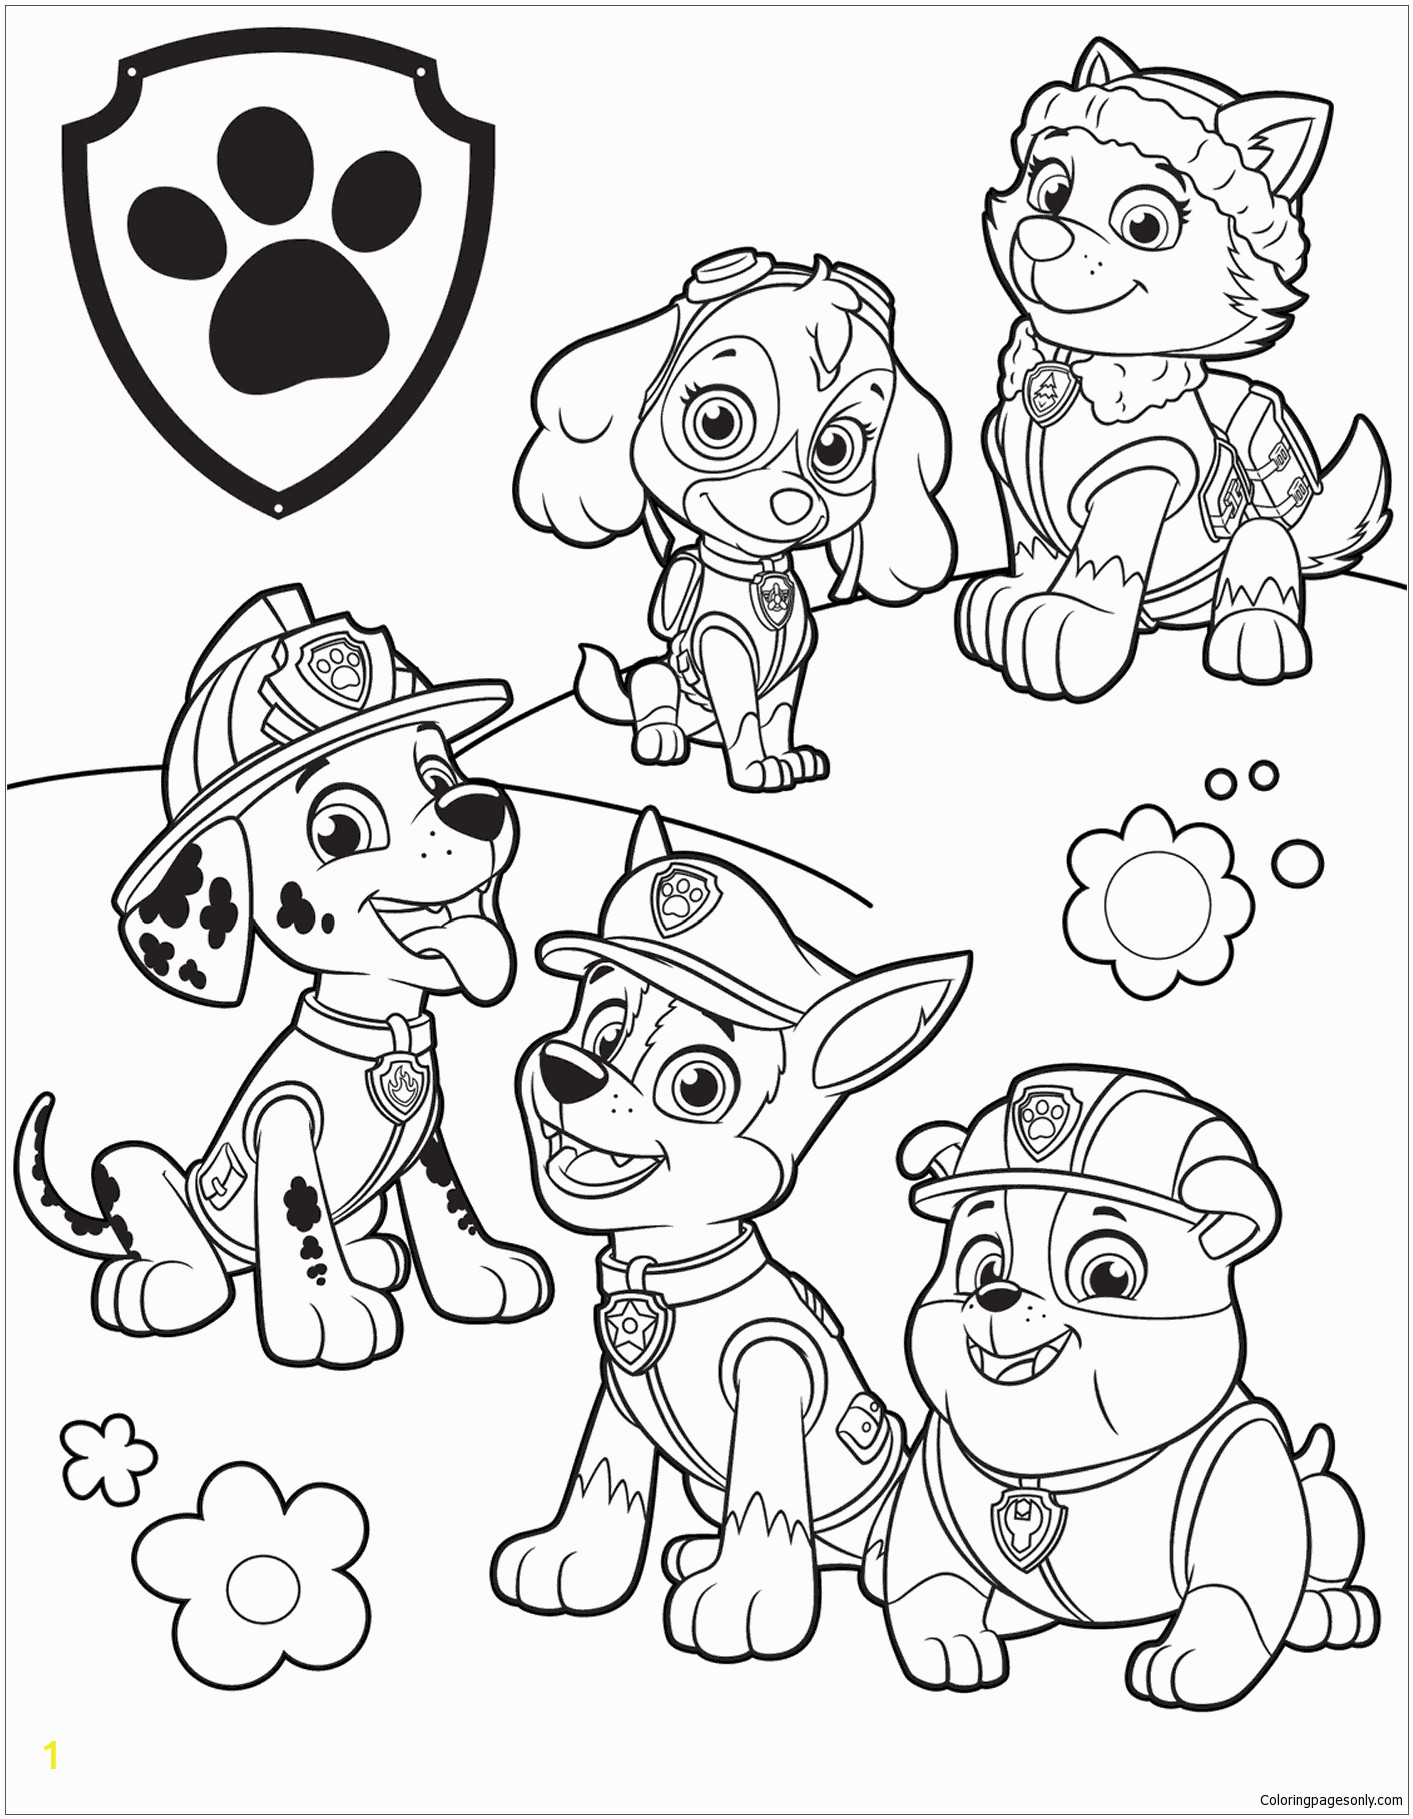 Free Printable Paw Patrol Coloring Pages Paw Patrol 39 Coloring Pages Cartoons Coloring Pages